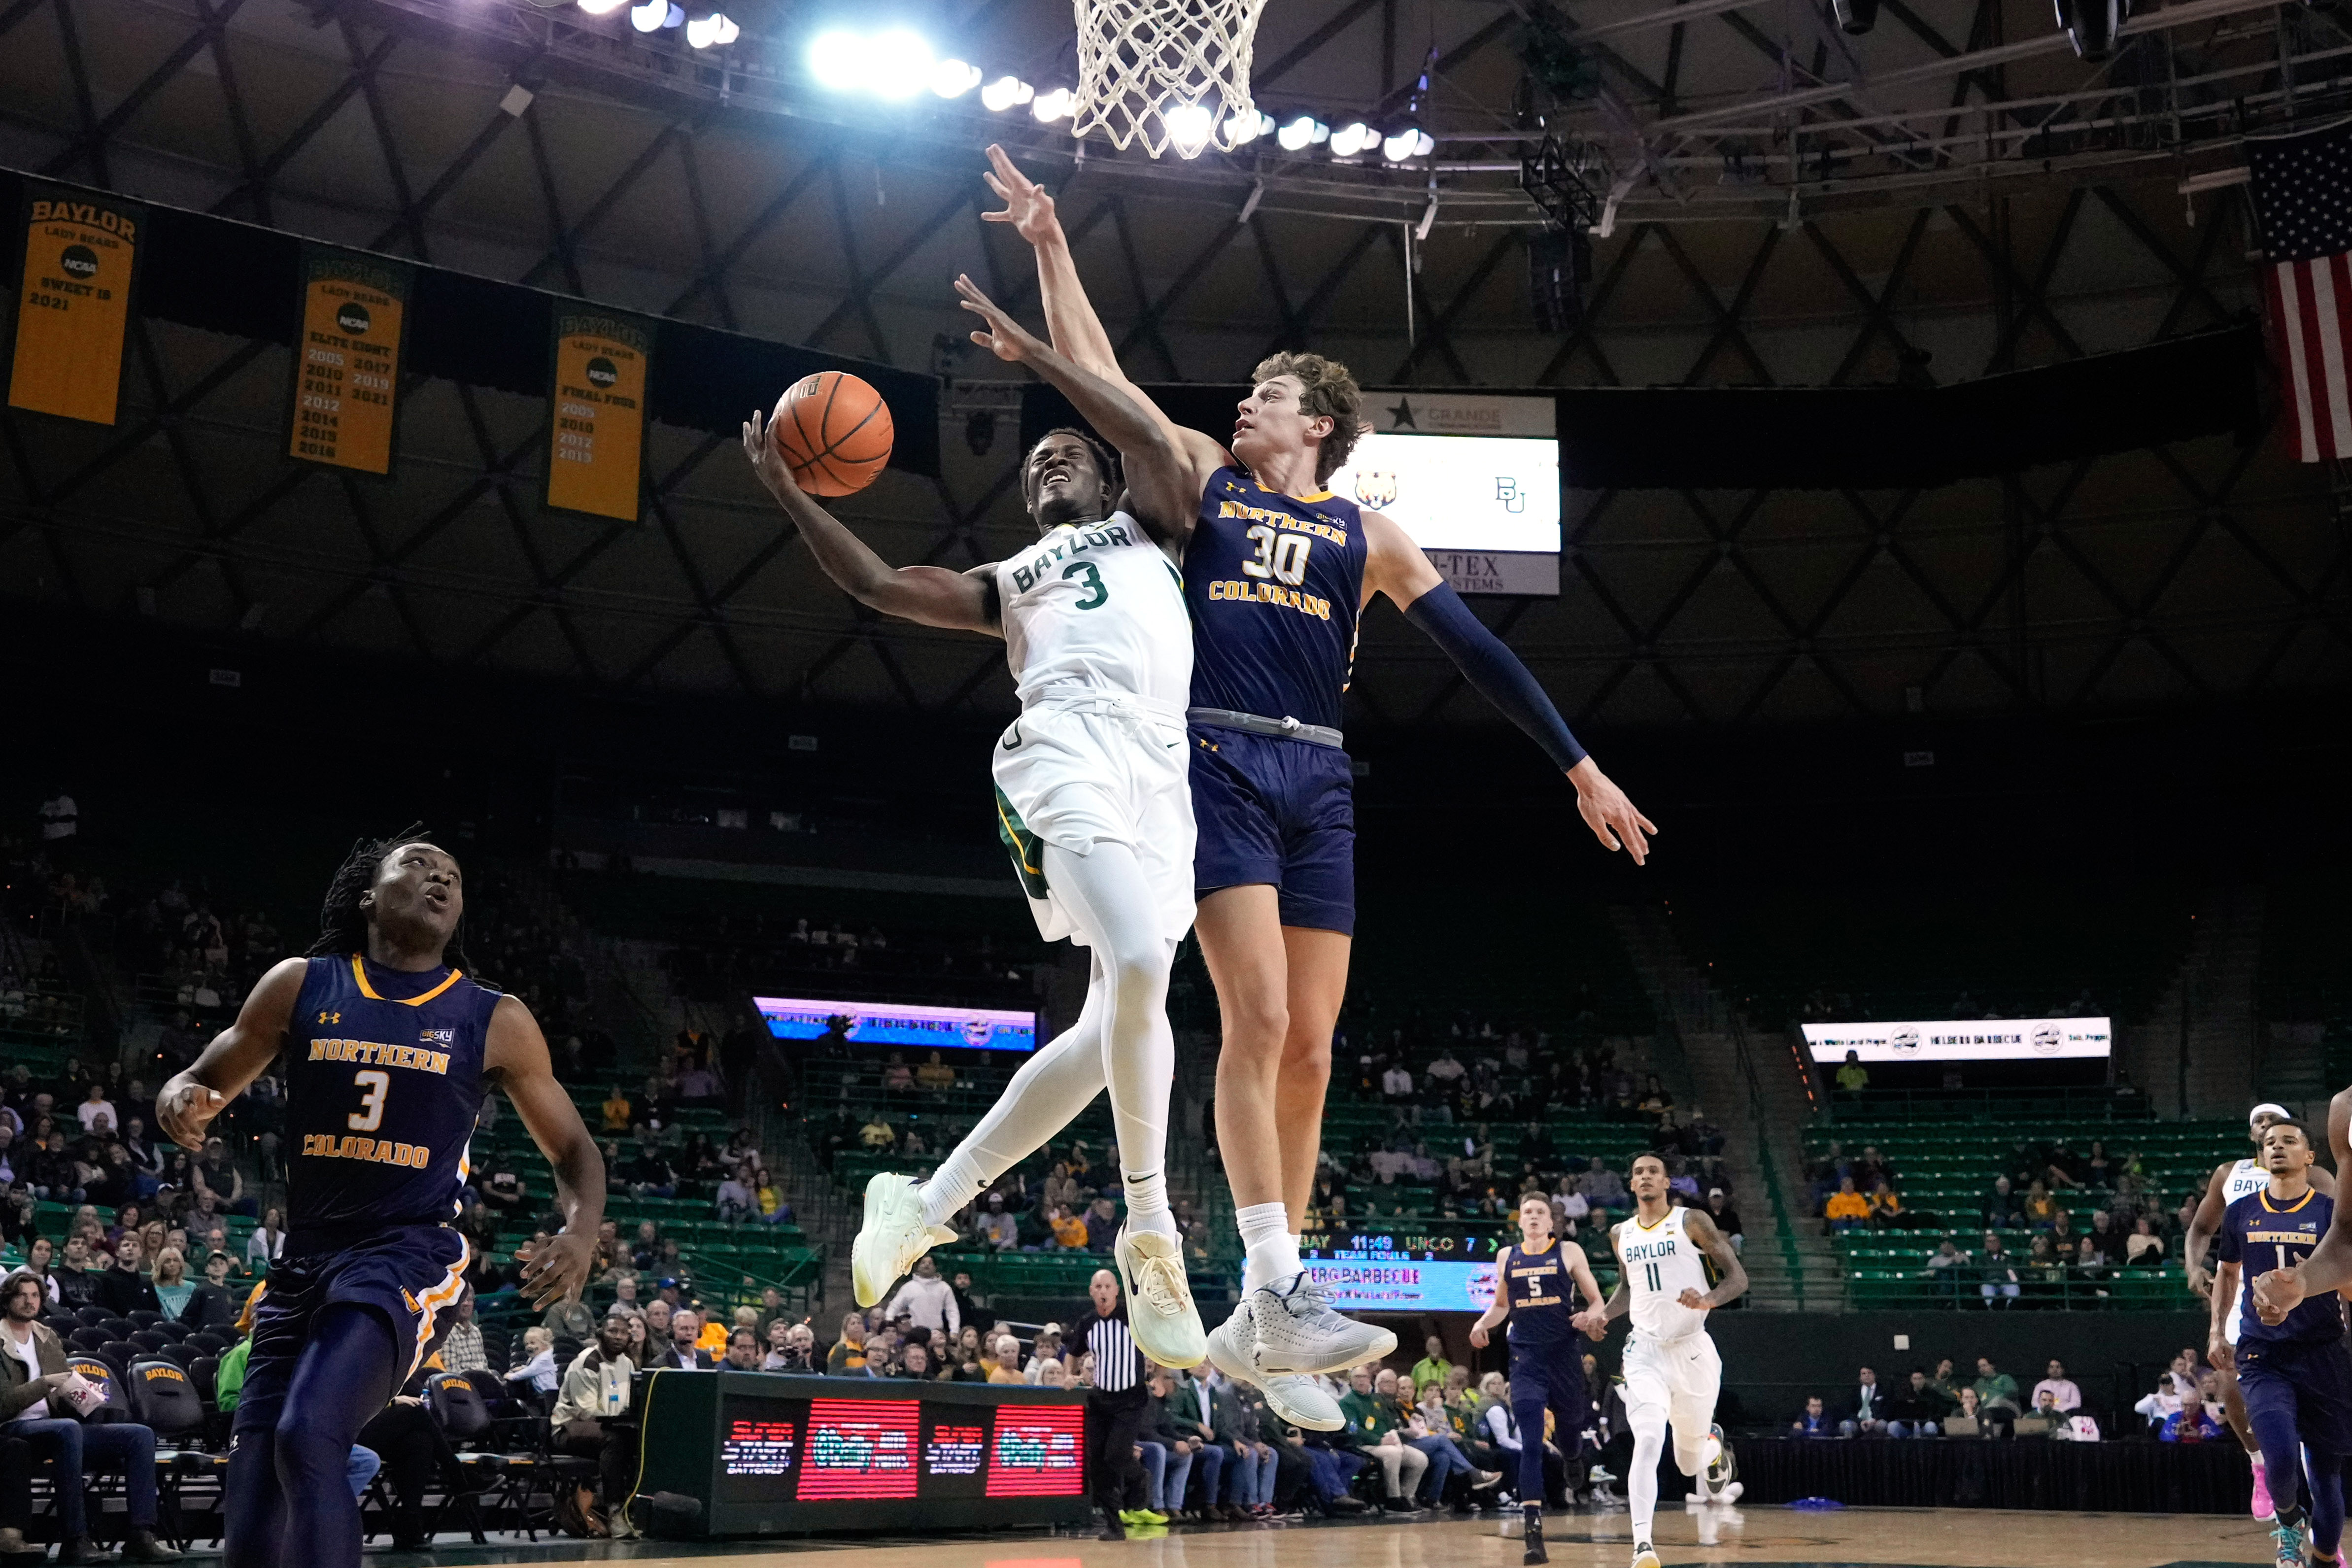 Baylor Men Move Up to No. 6 in Latest AP Poll